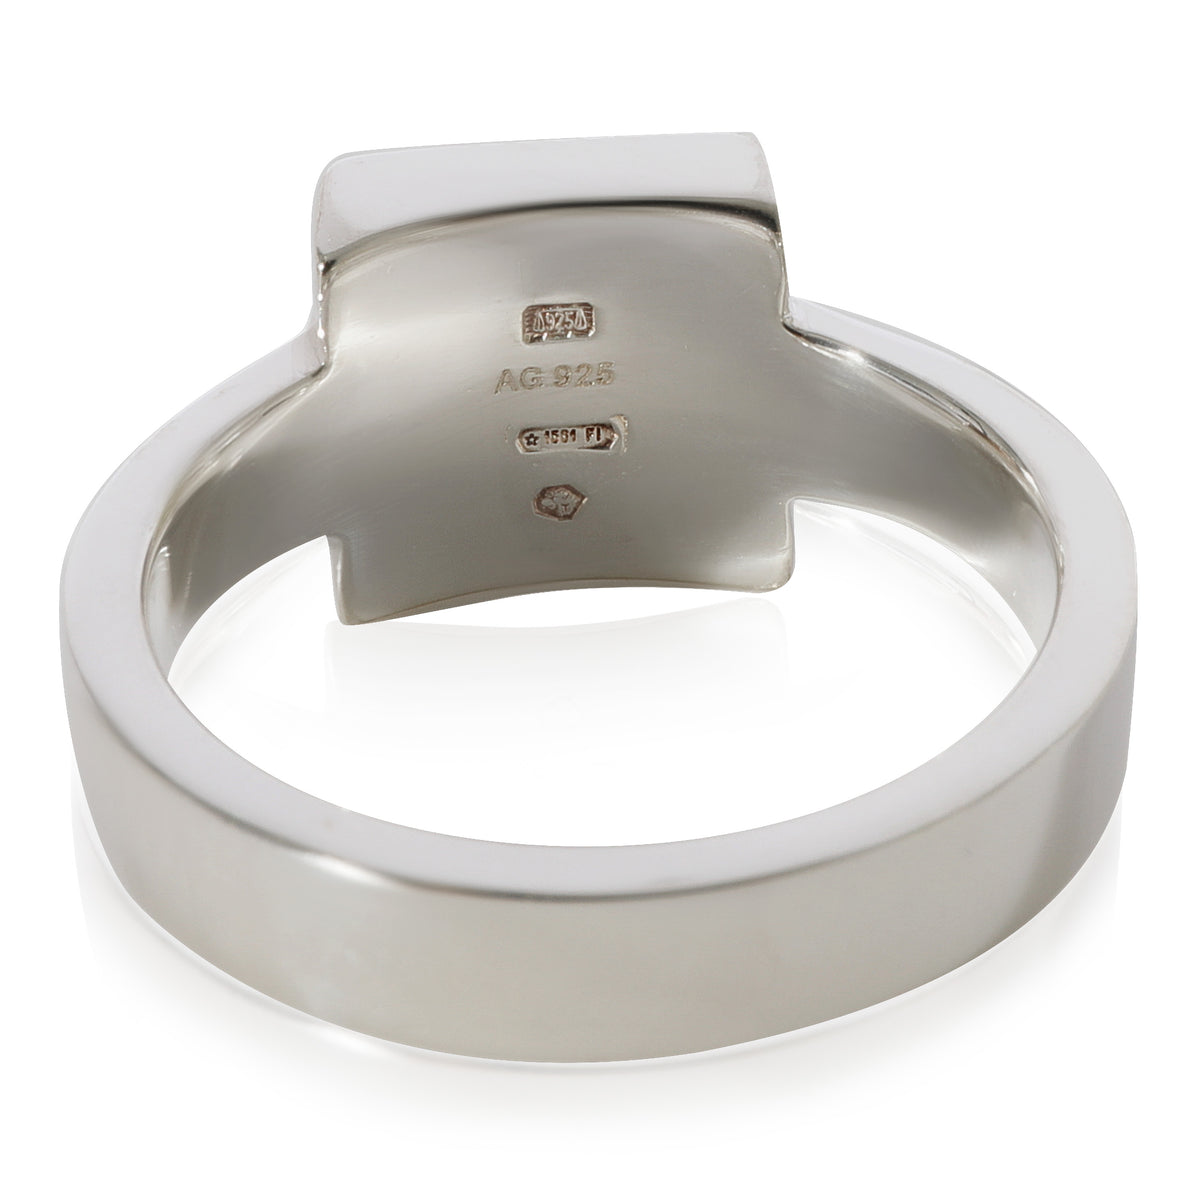 Gucci Trademark Square Top Logo Ring in  Sterling Silver